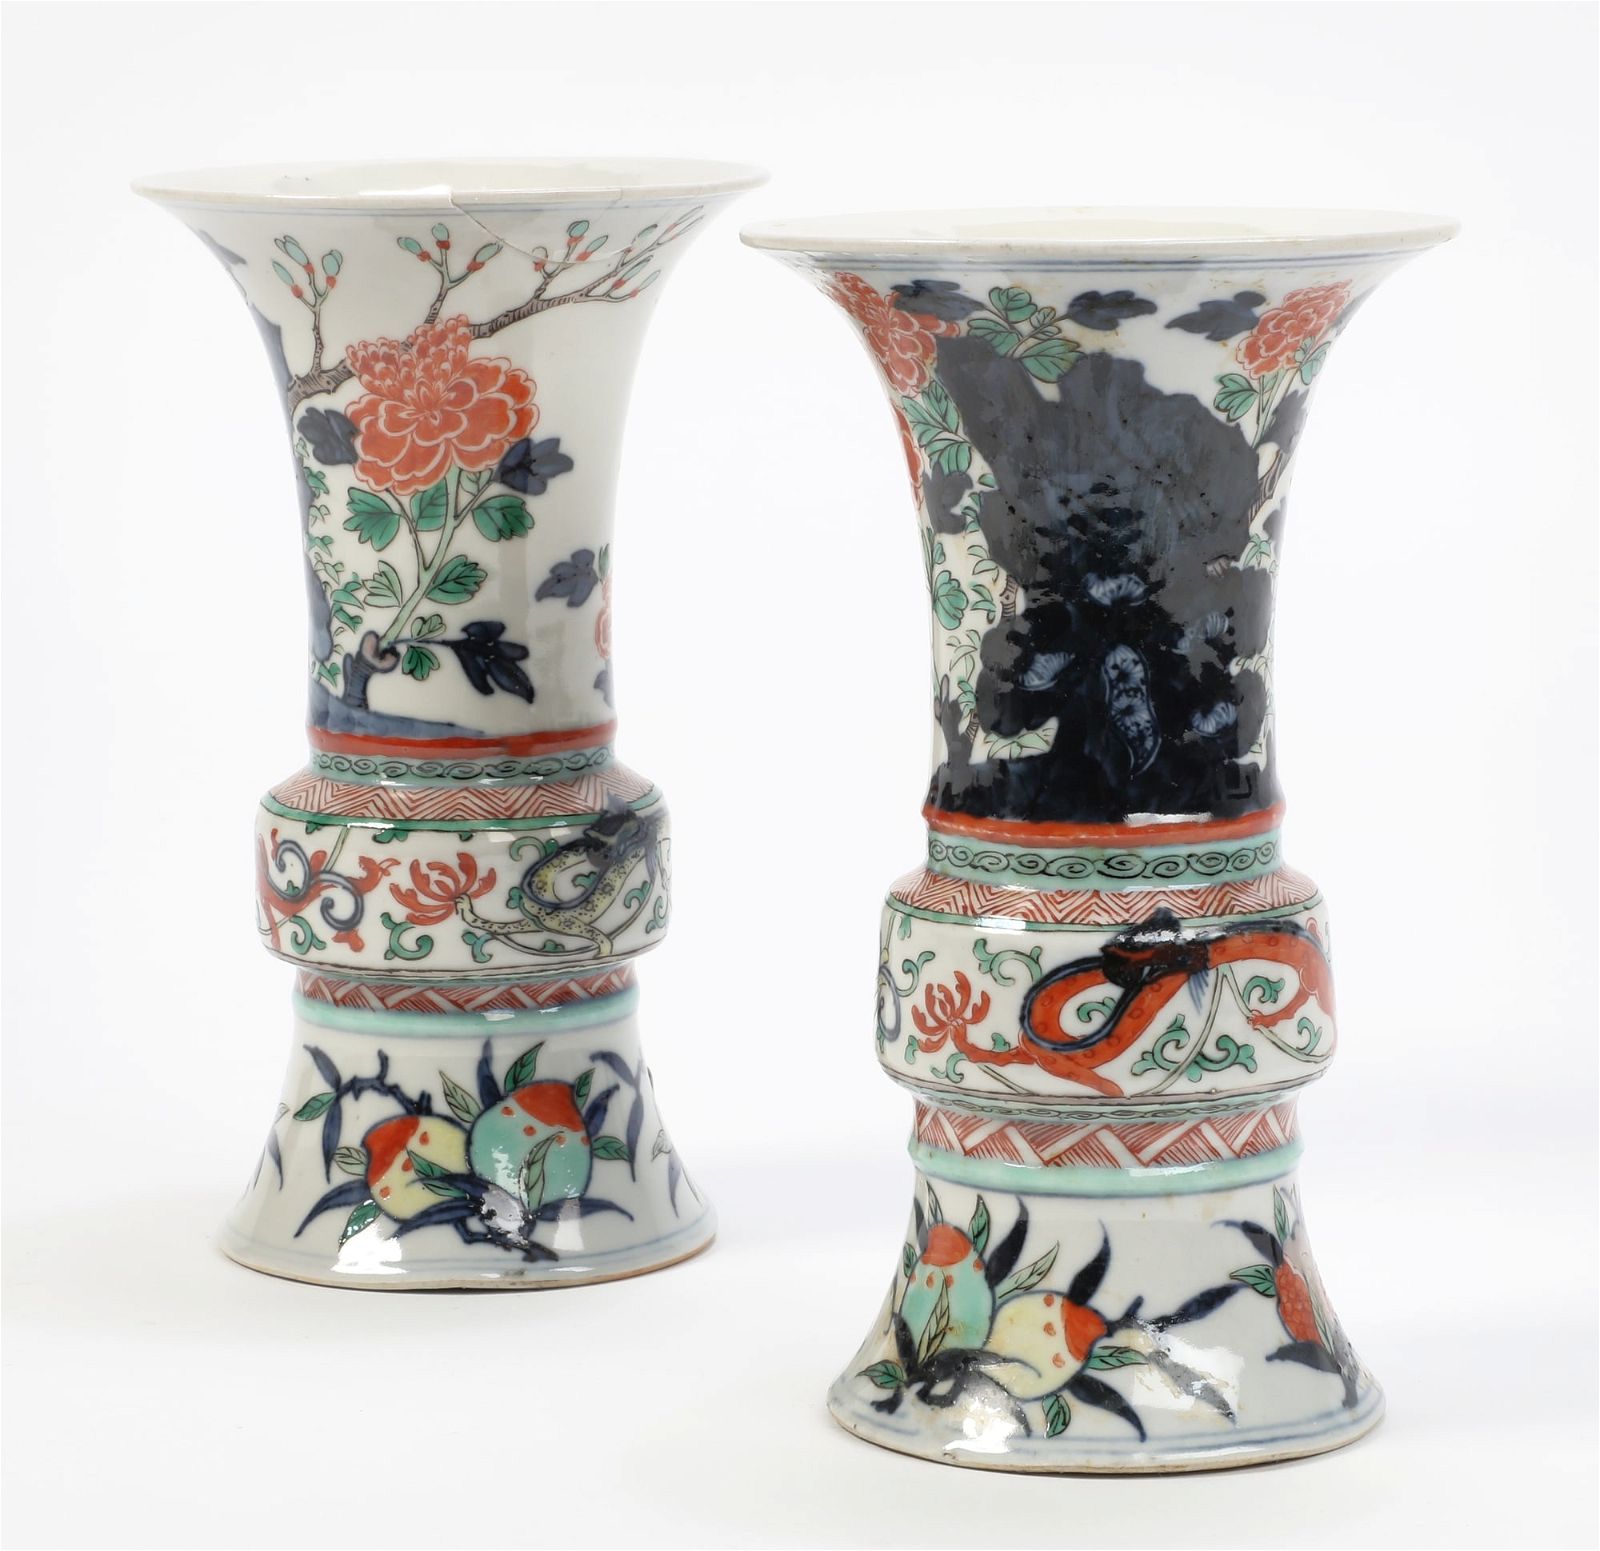 A PAIR OF CHINESE POLYCHROME GLAZED